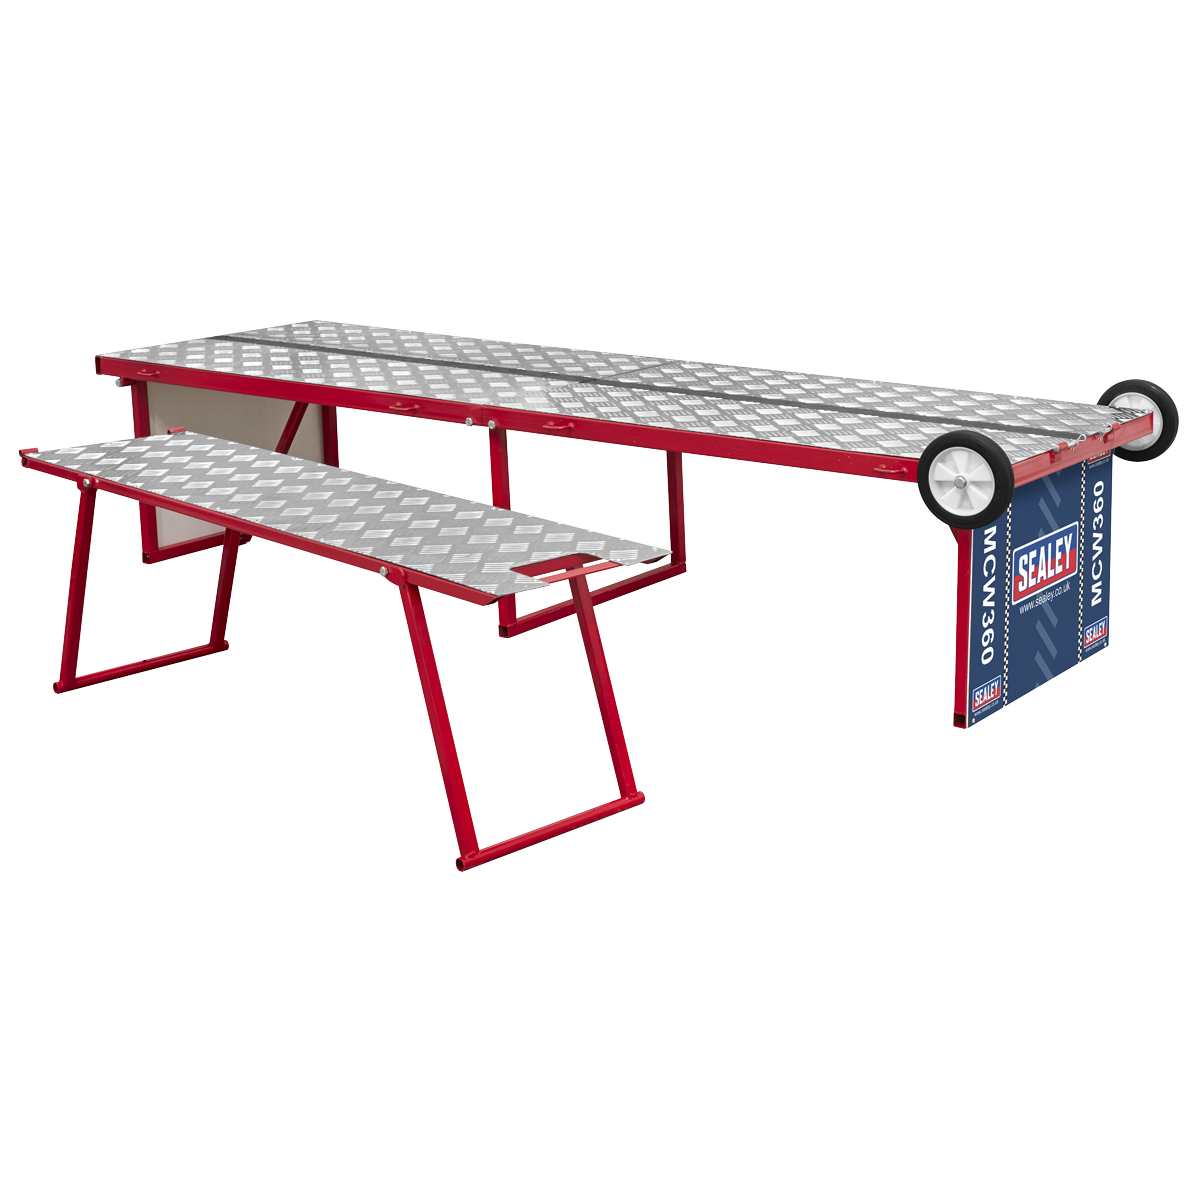 Suitable for professional workshops, mobile mechanics, enthusiasts, track days or as a display table in showrooms